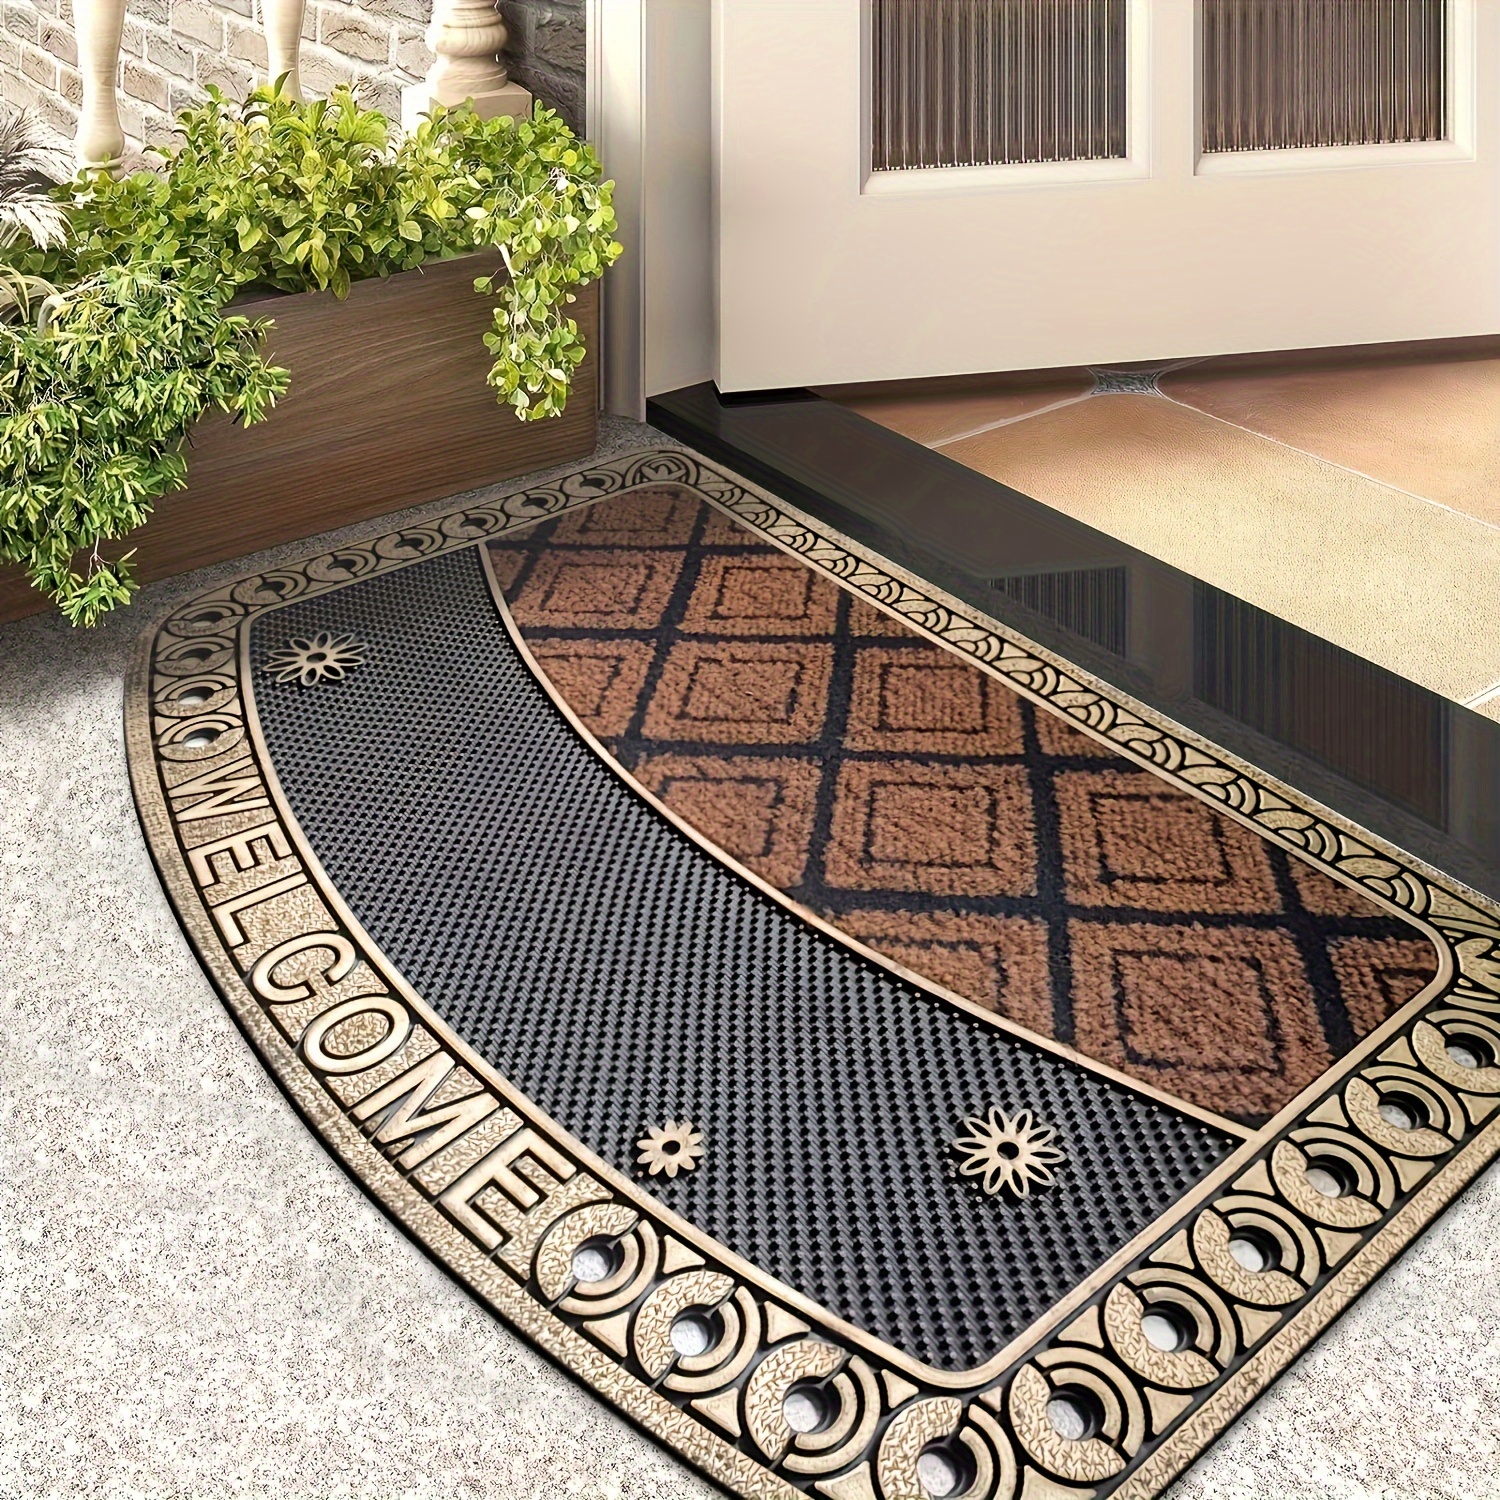 

1pc Water-absorbent & Mud-resistant Outdoor Mat - Slip-proof, Multi-functional Pvc Blend For Patio And Yard Decor, 45cm X 75cm